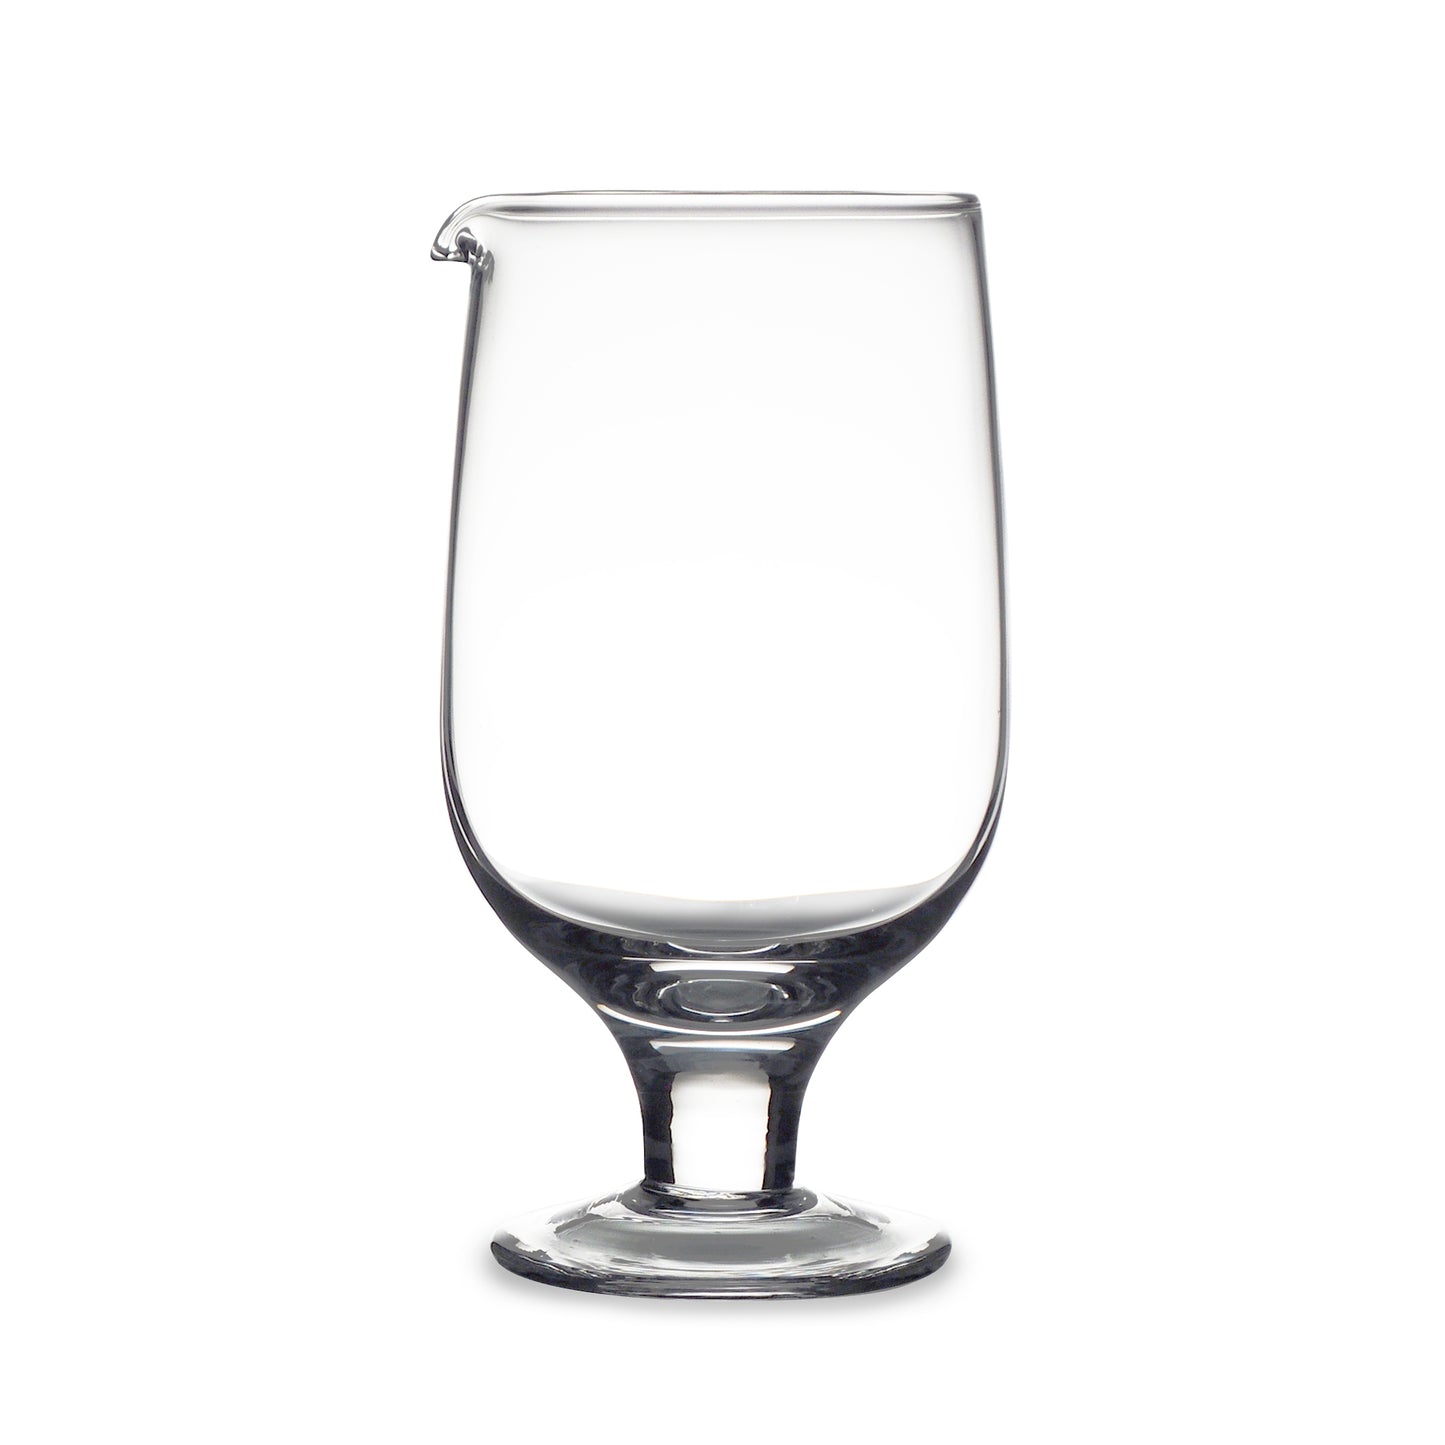 EXTRA LARGE STEMMED MIXING GLASS / 750ml (25oz)